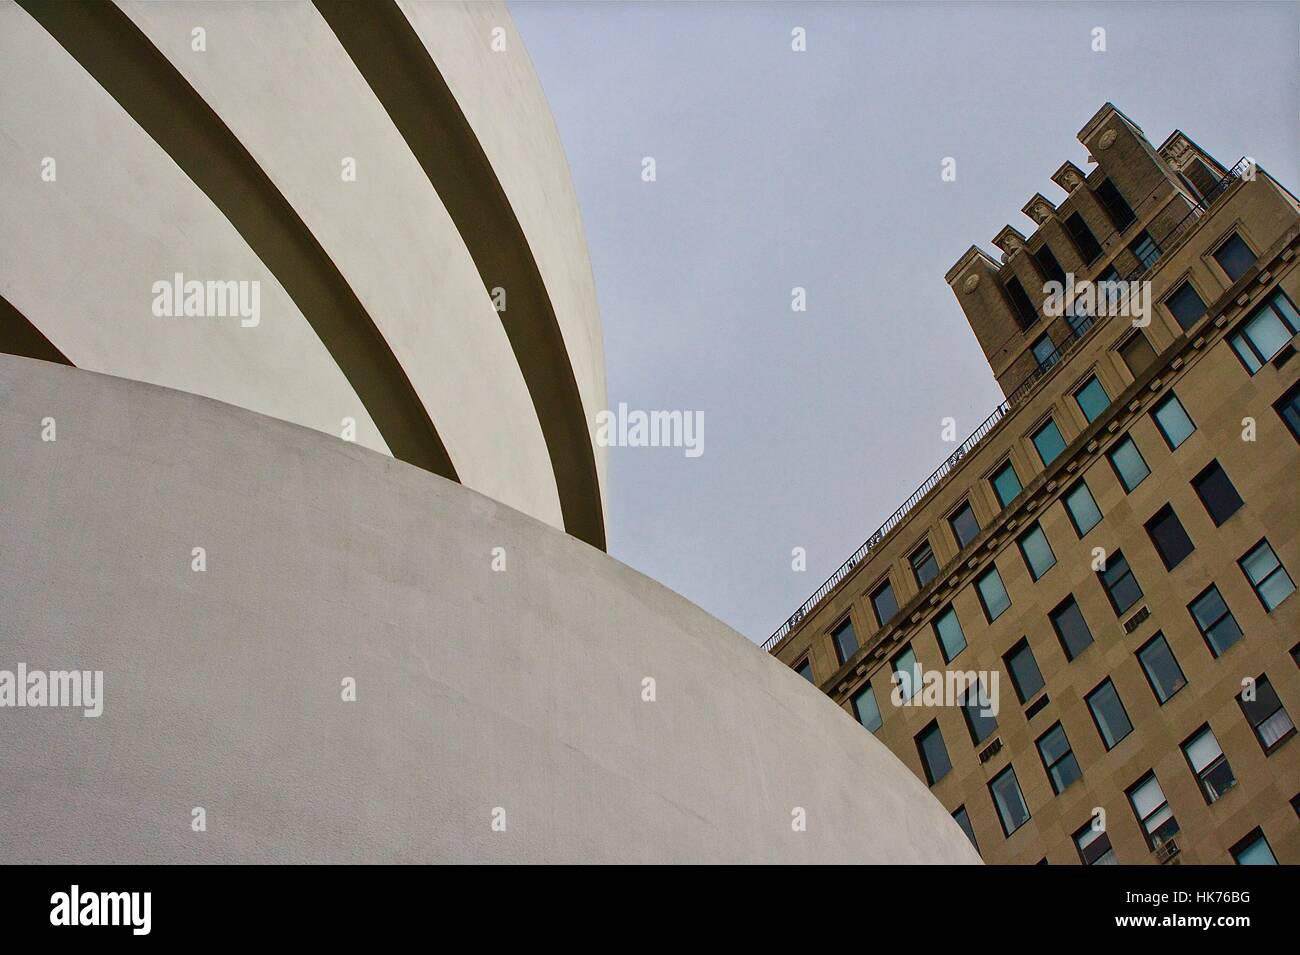 Exterior of The Solomon R. Guggenheim Museum showing Modern and older Architecture New York U.S.A. Stock Photo